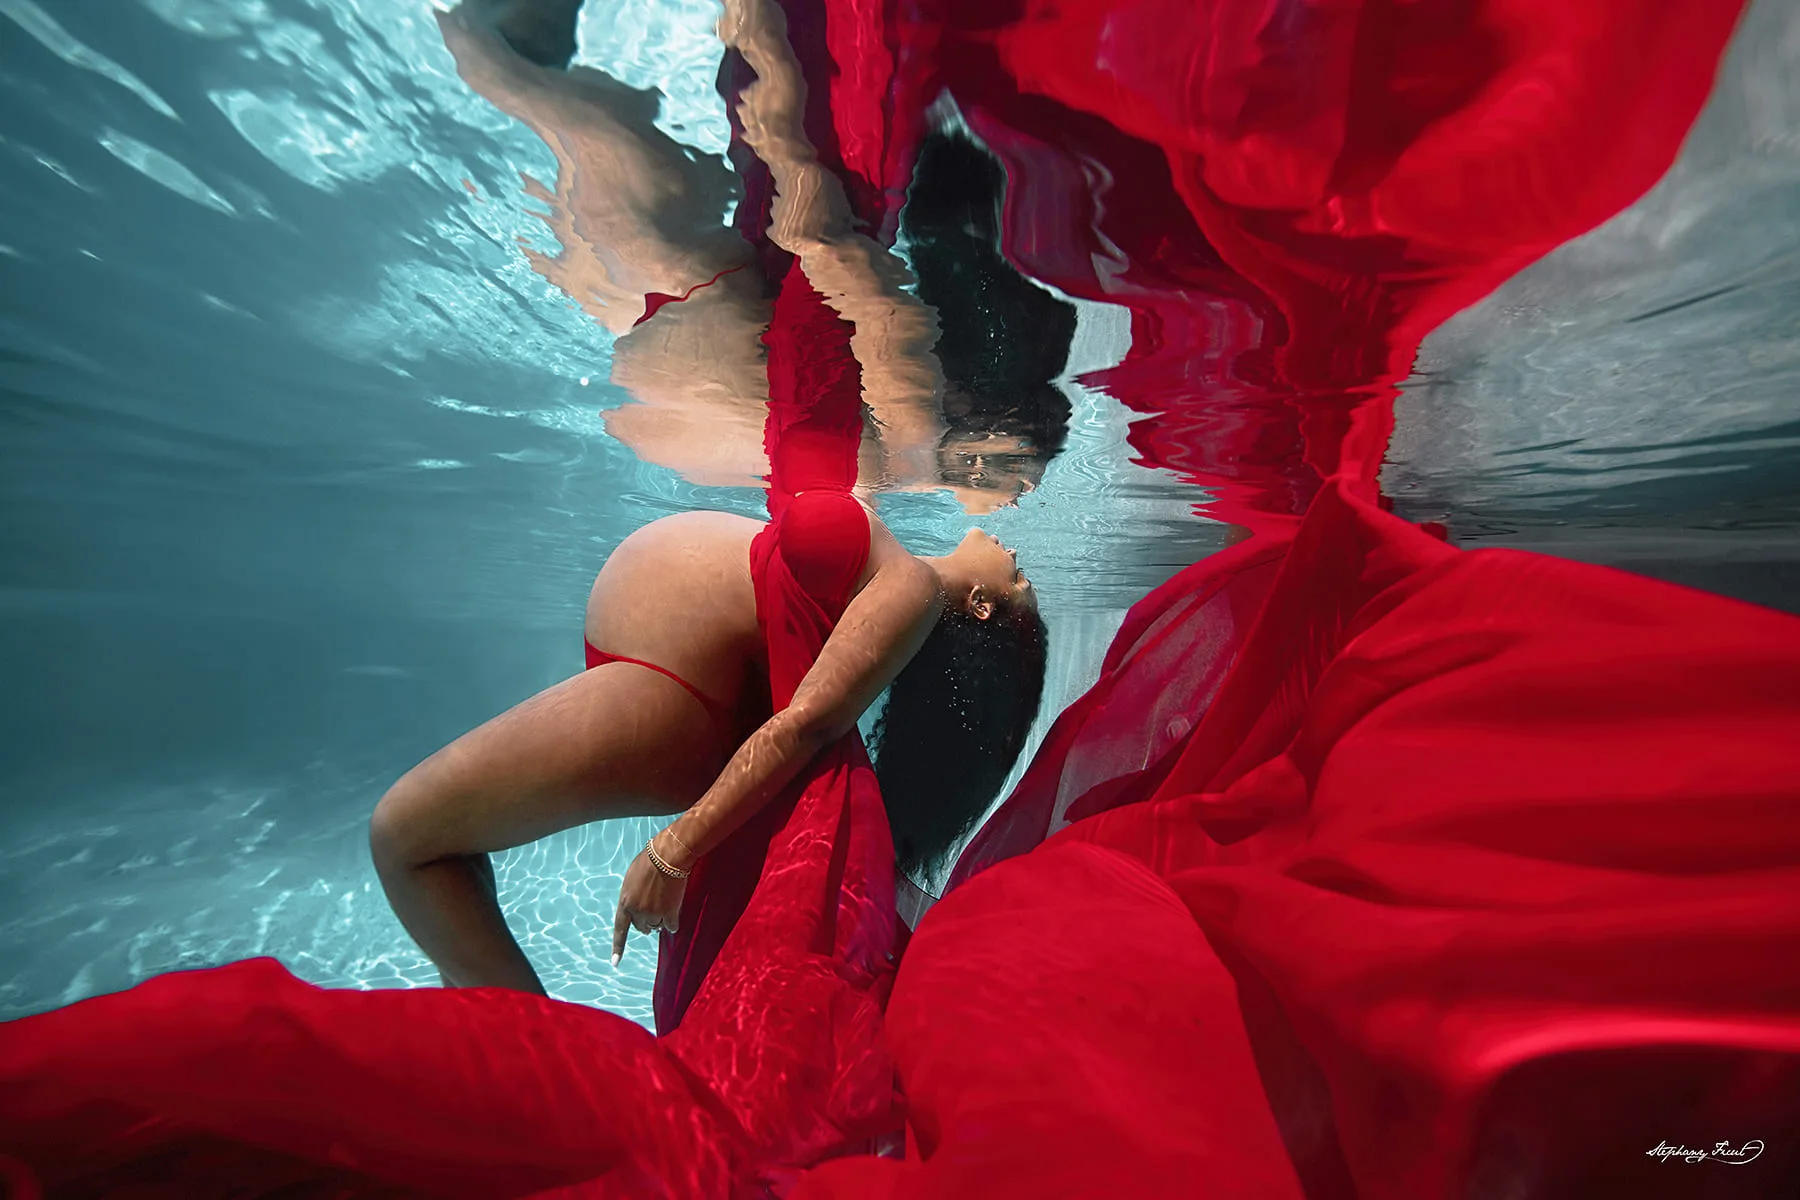 Underwater maternity photo session experience by Stephany Ficut Photography in red gown